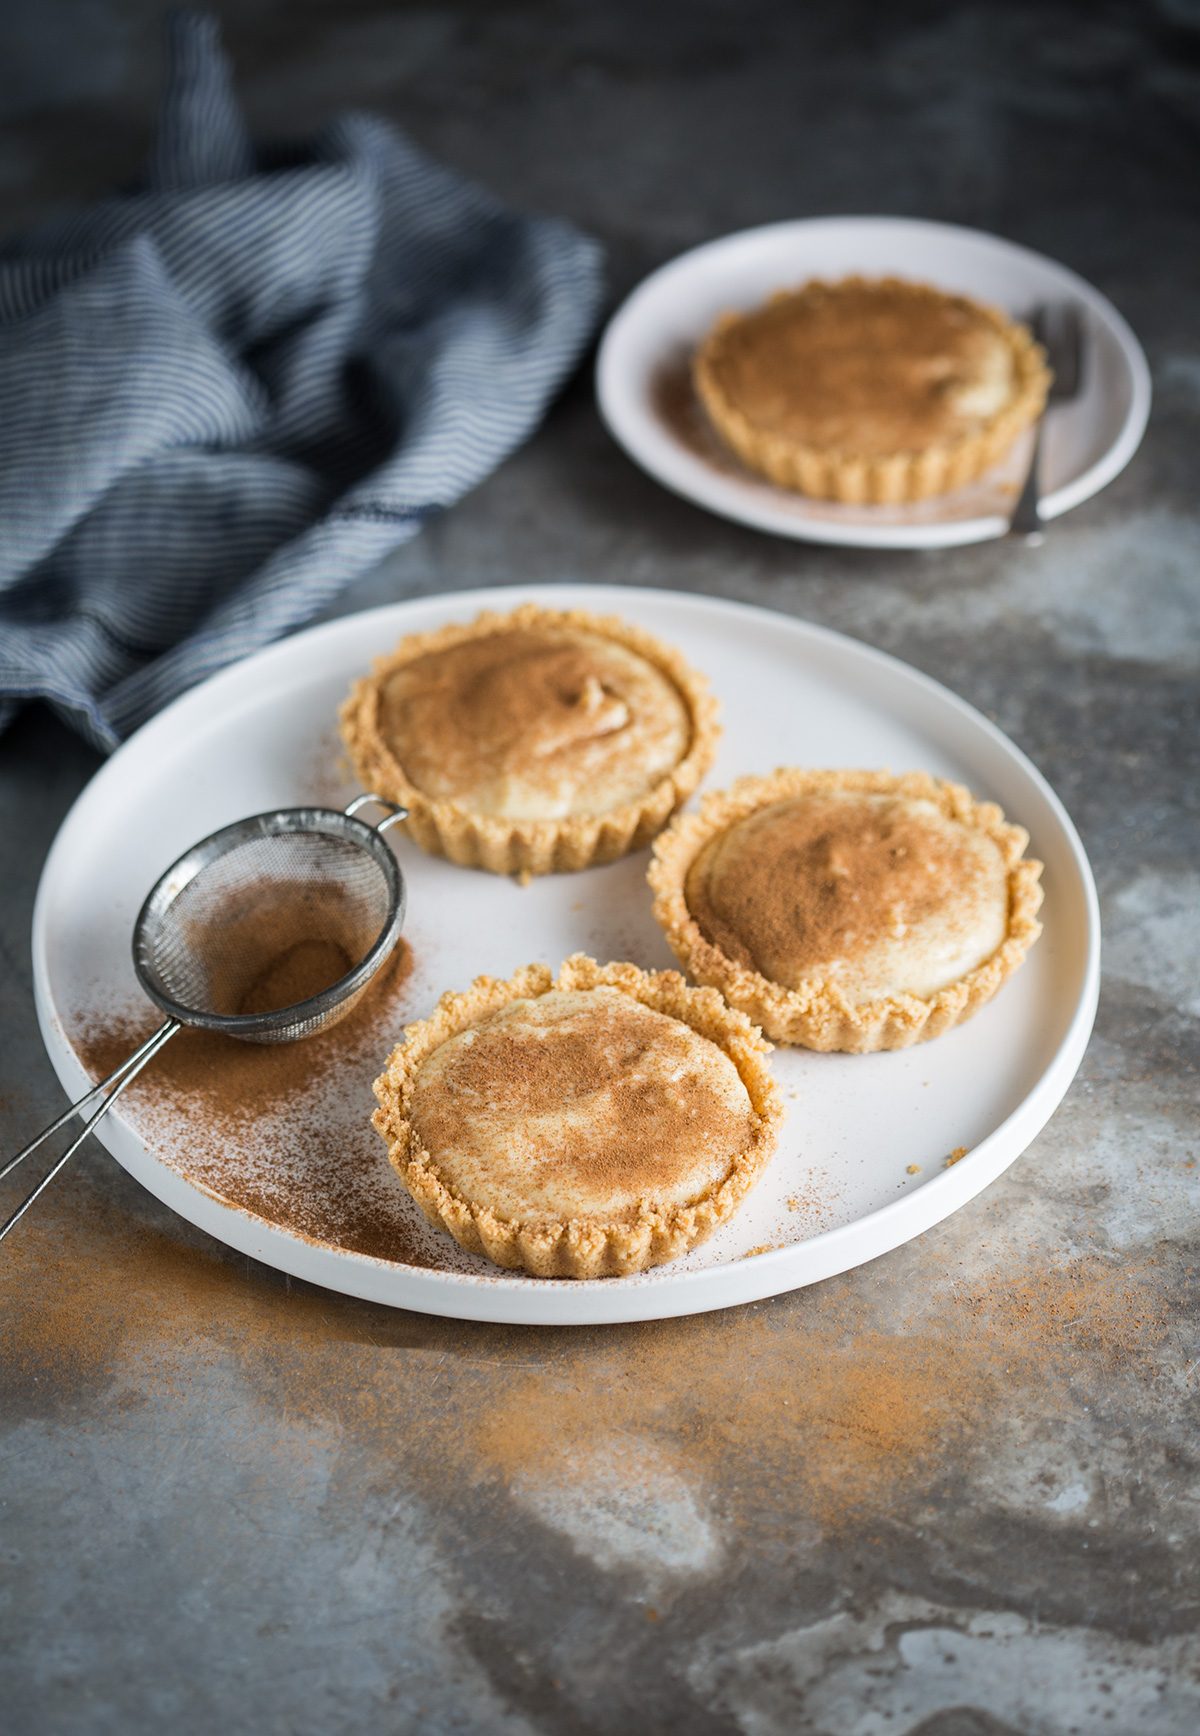 A recipe for classic South African unbaked milk tarts